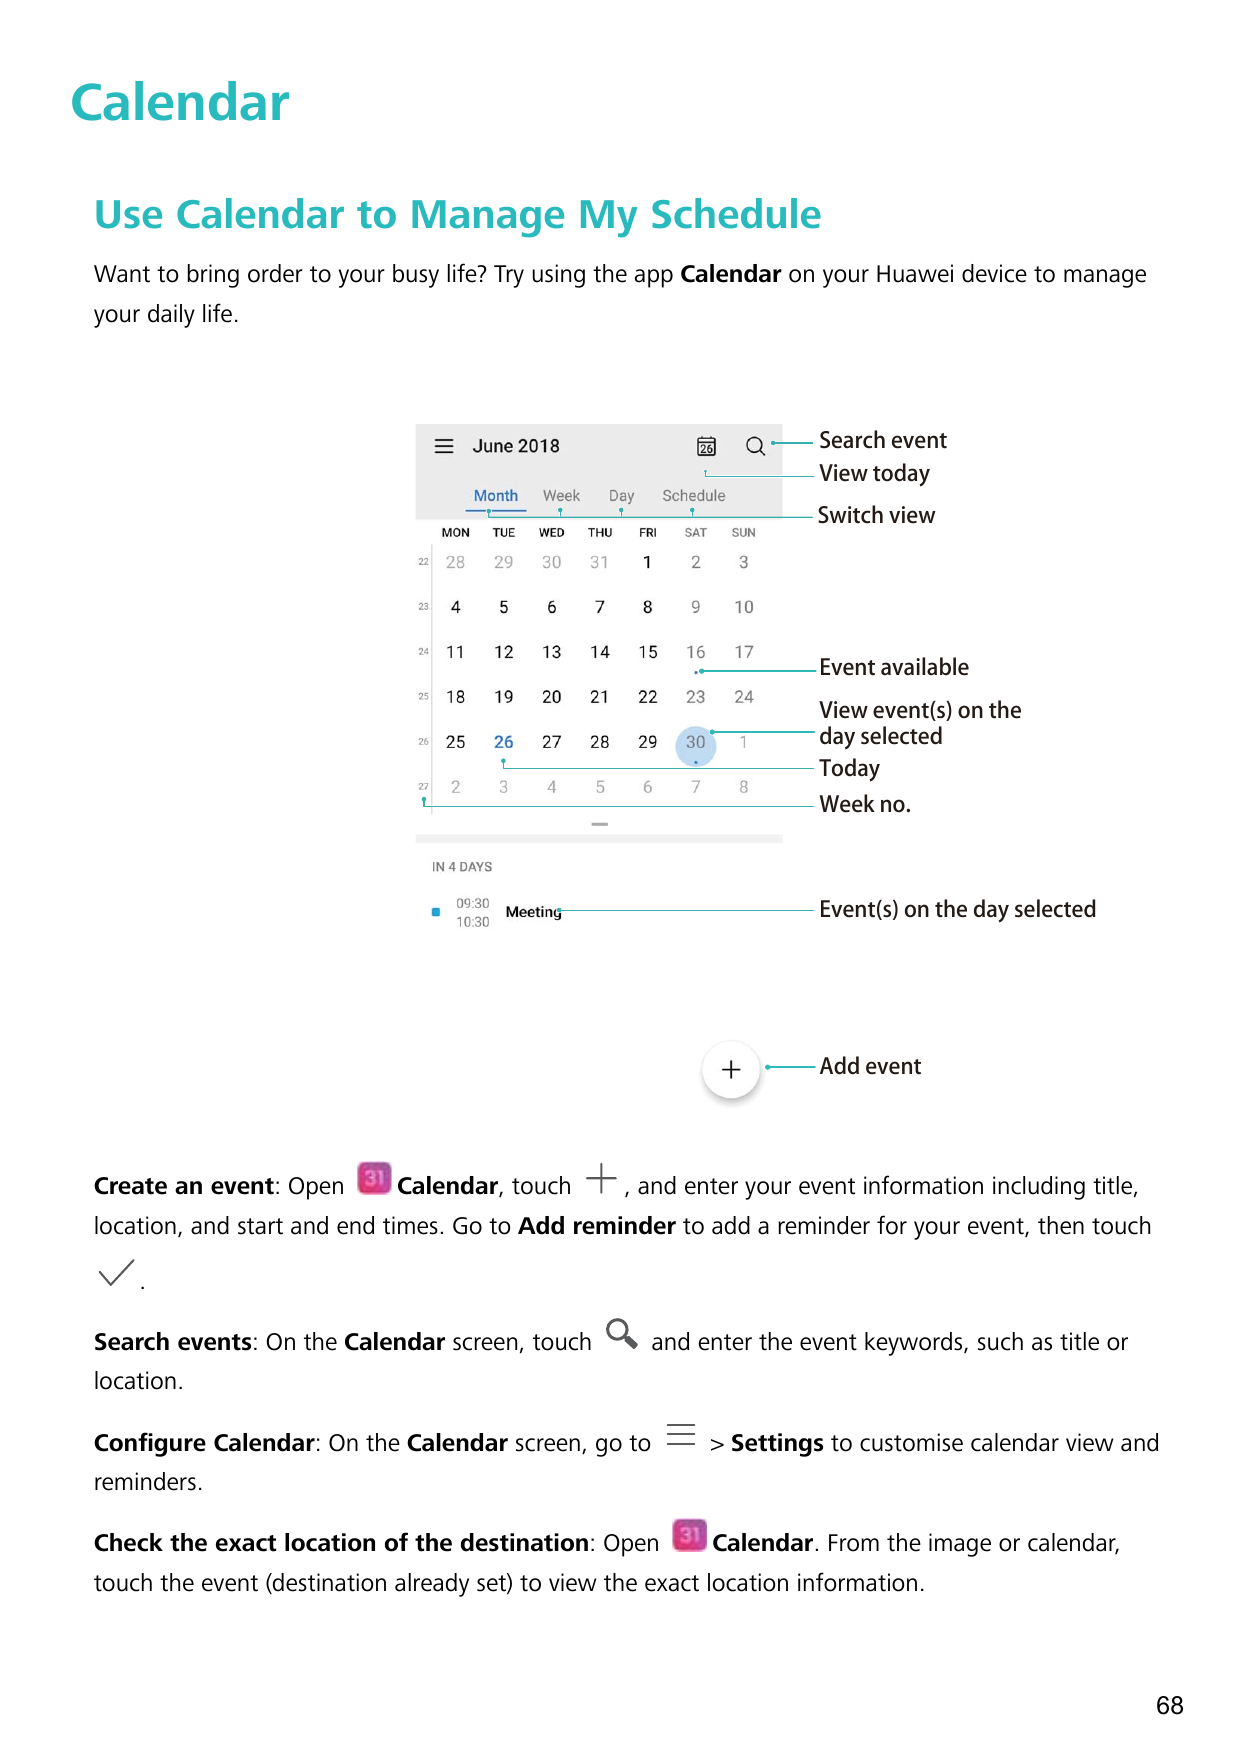 CalendarUse Calendar to Manage My ScheduleWant to bring order to your busy life? Try using the app Calendar on your Huawei devic